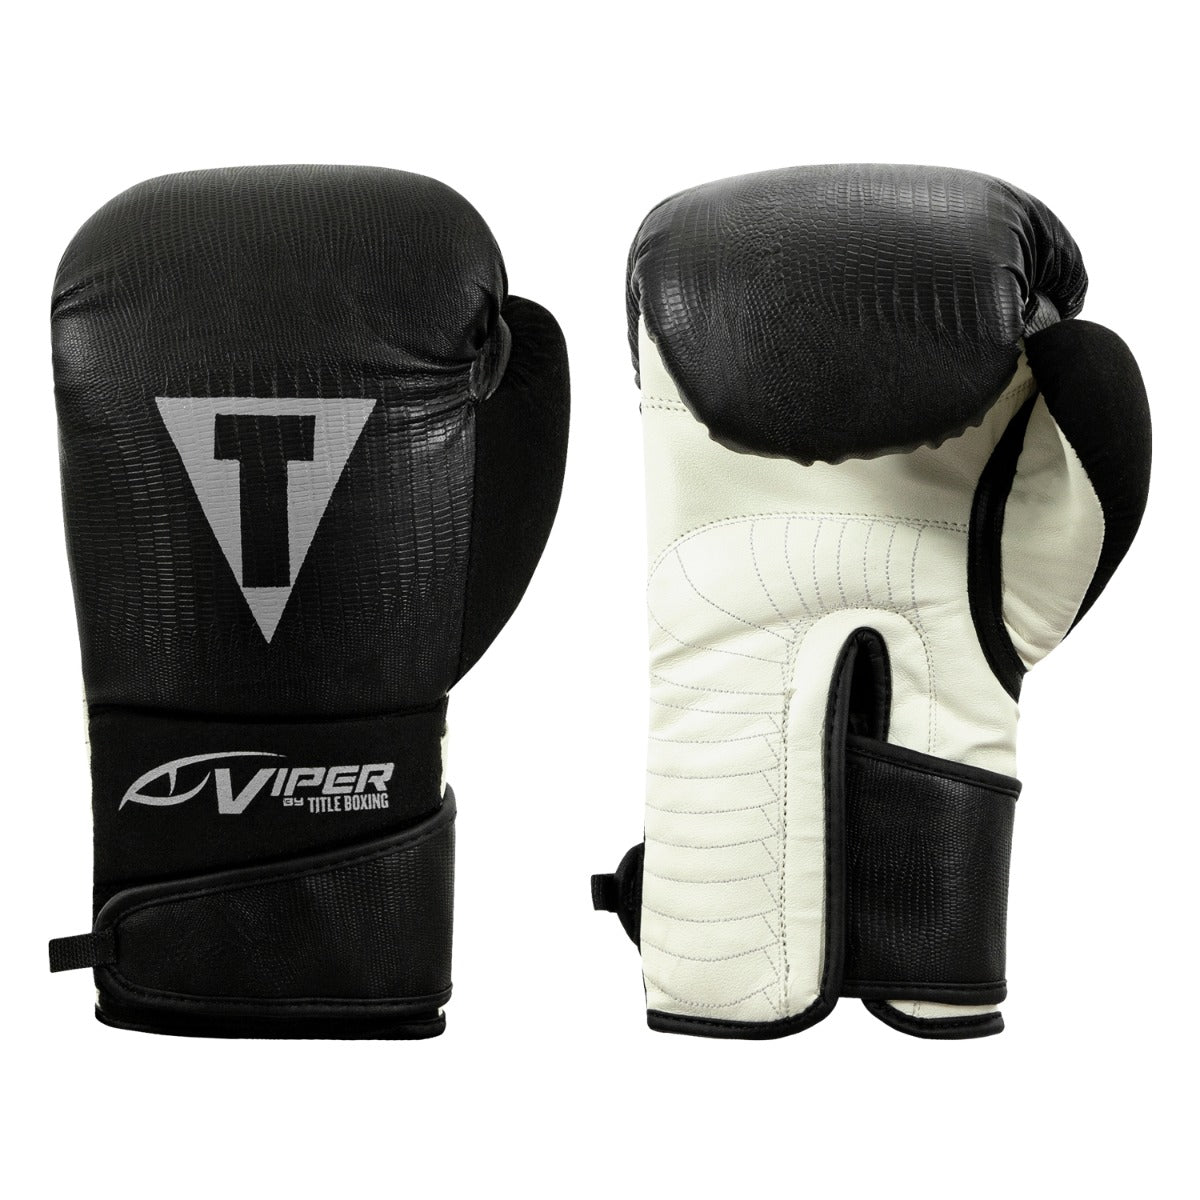 Viper Boxing Gloves Sparring Muay Thai Punch Bag Mma Rex Leather Gel Training 